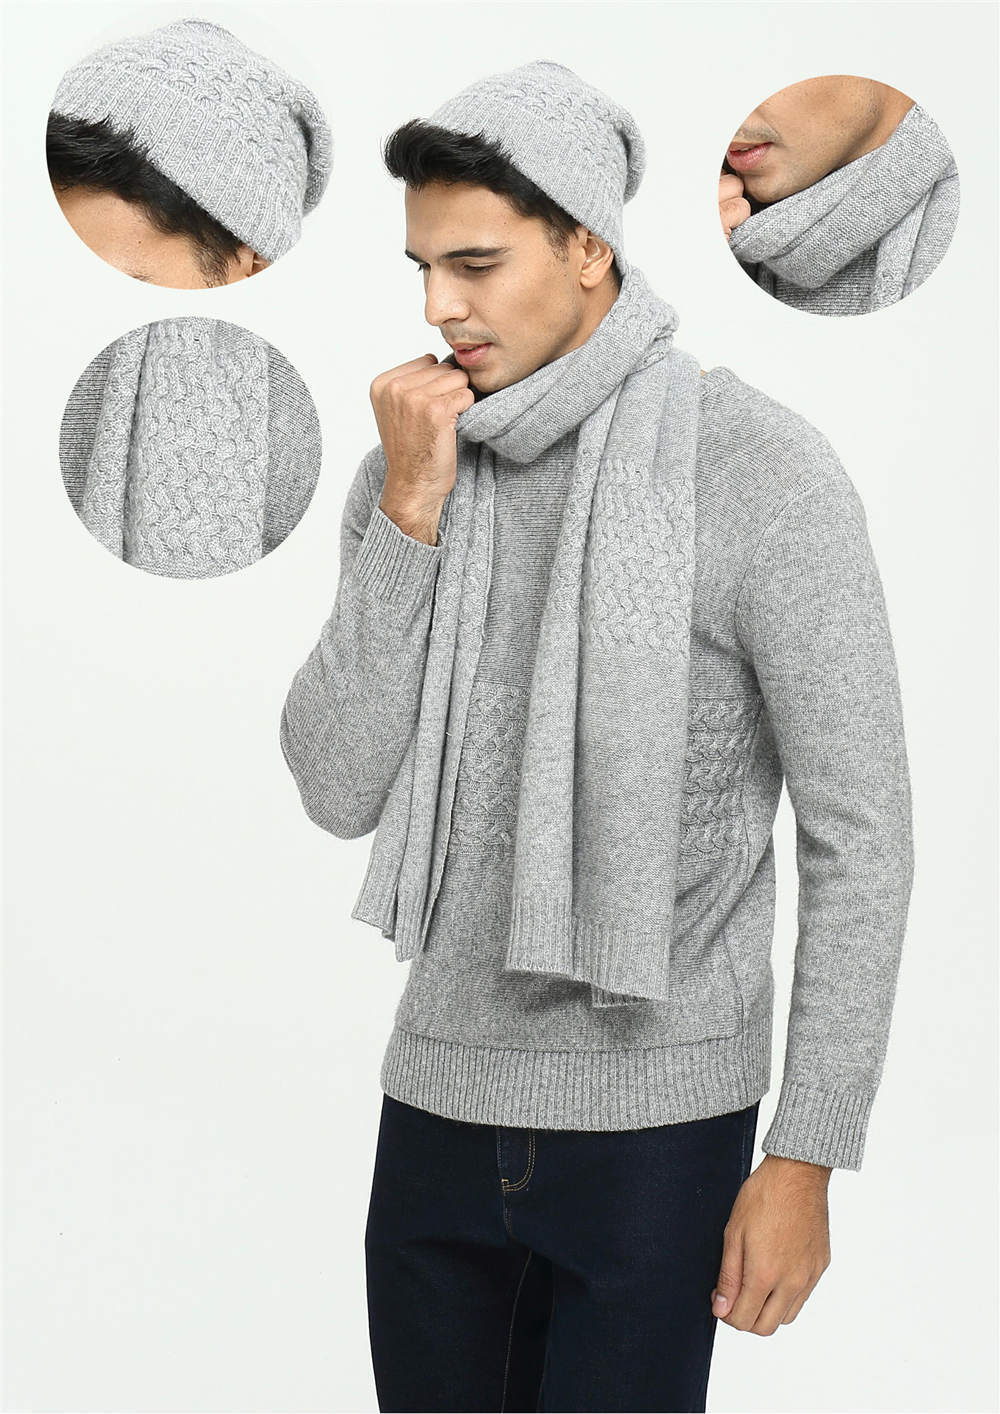 Men's solid colour pure cashmere cable hat and scarf suit for fall winter